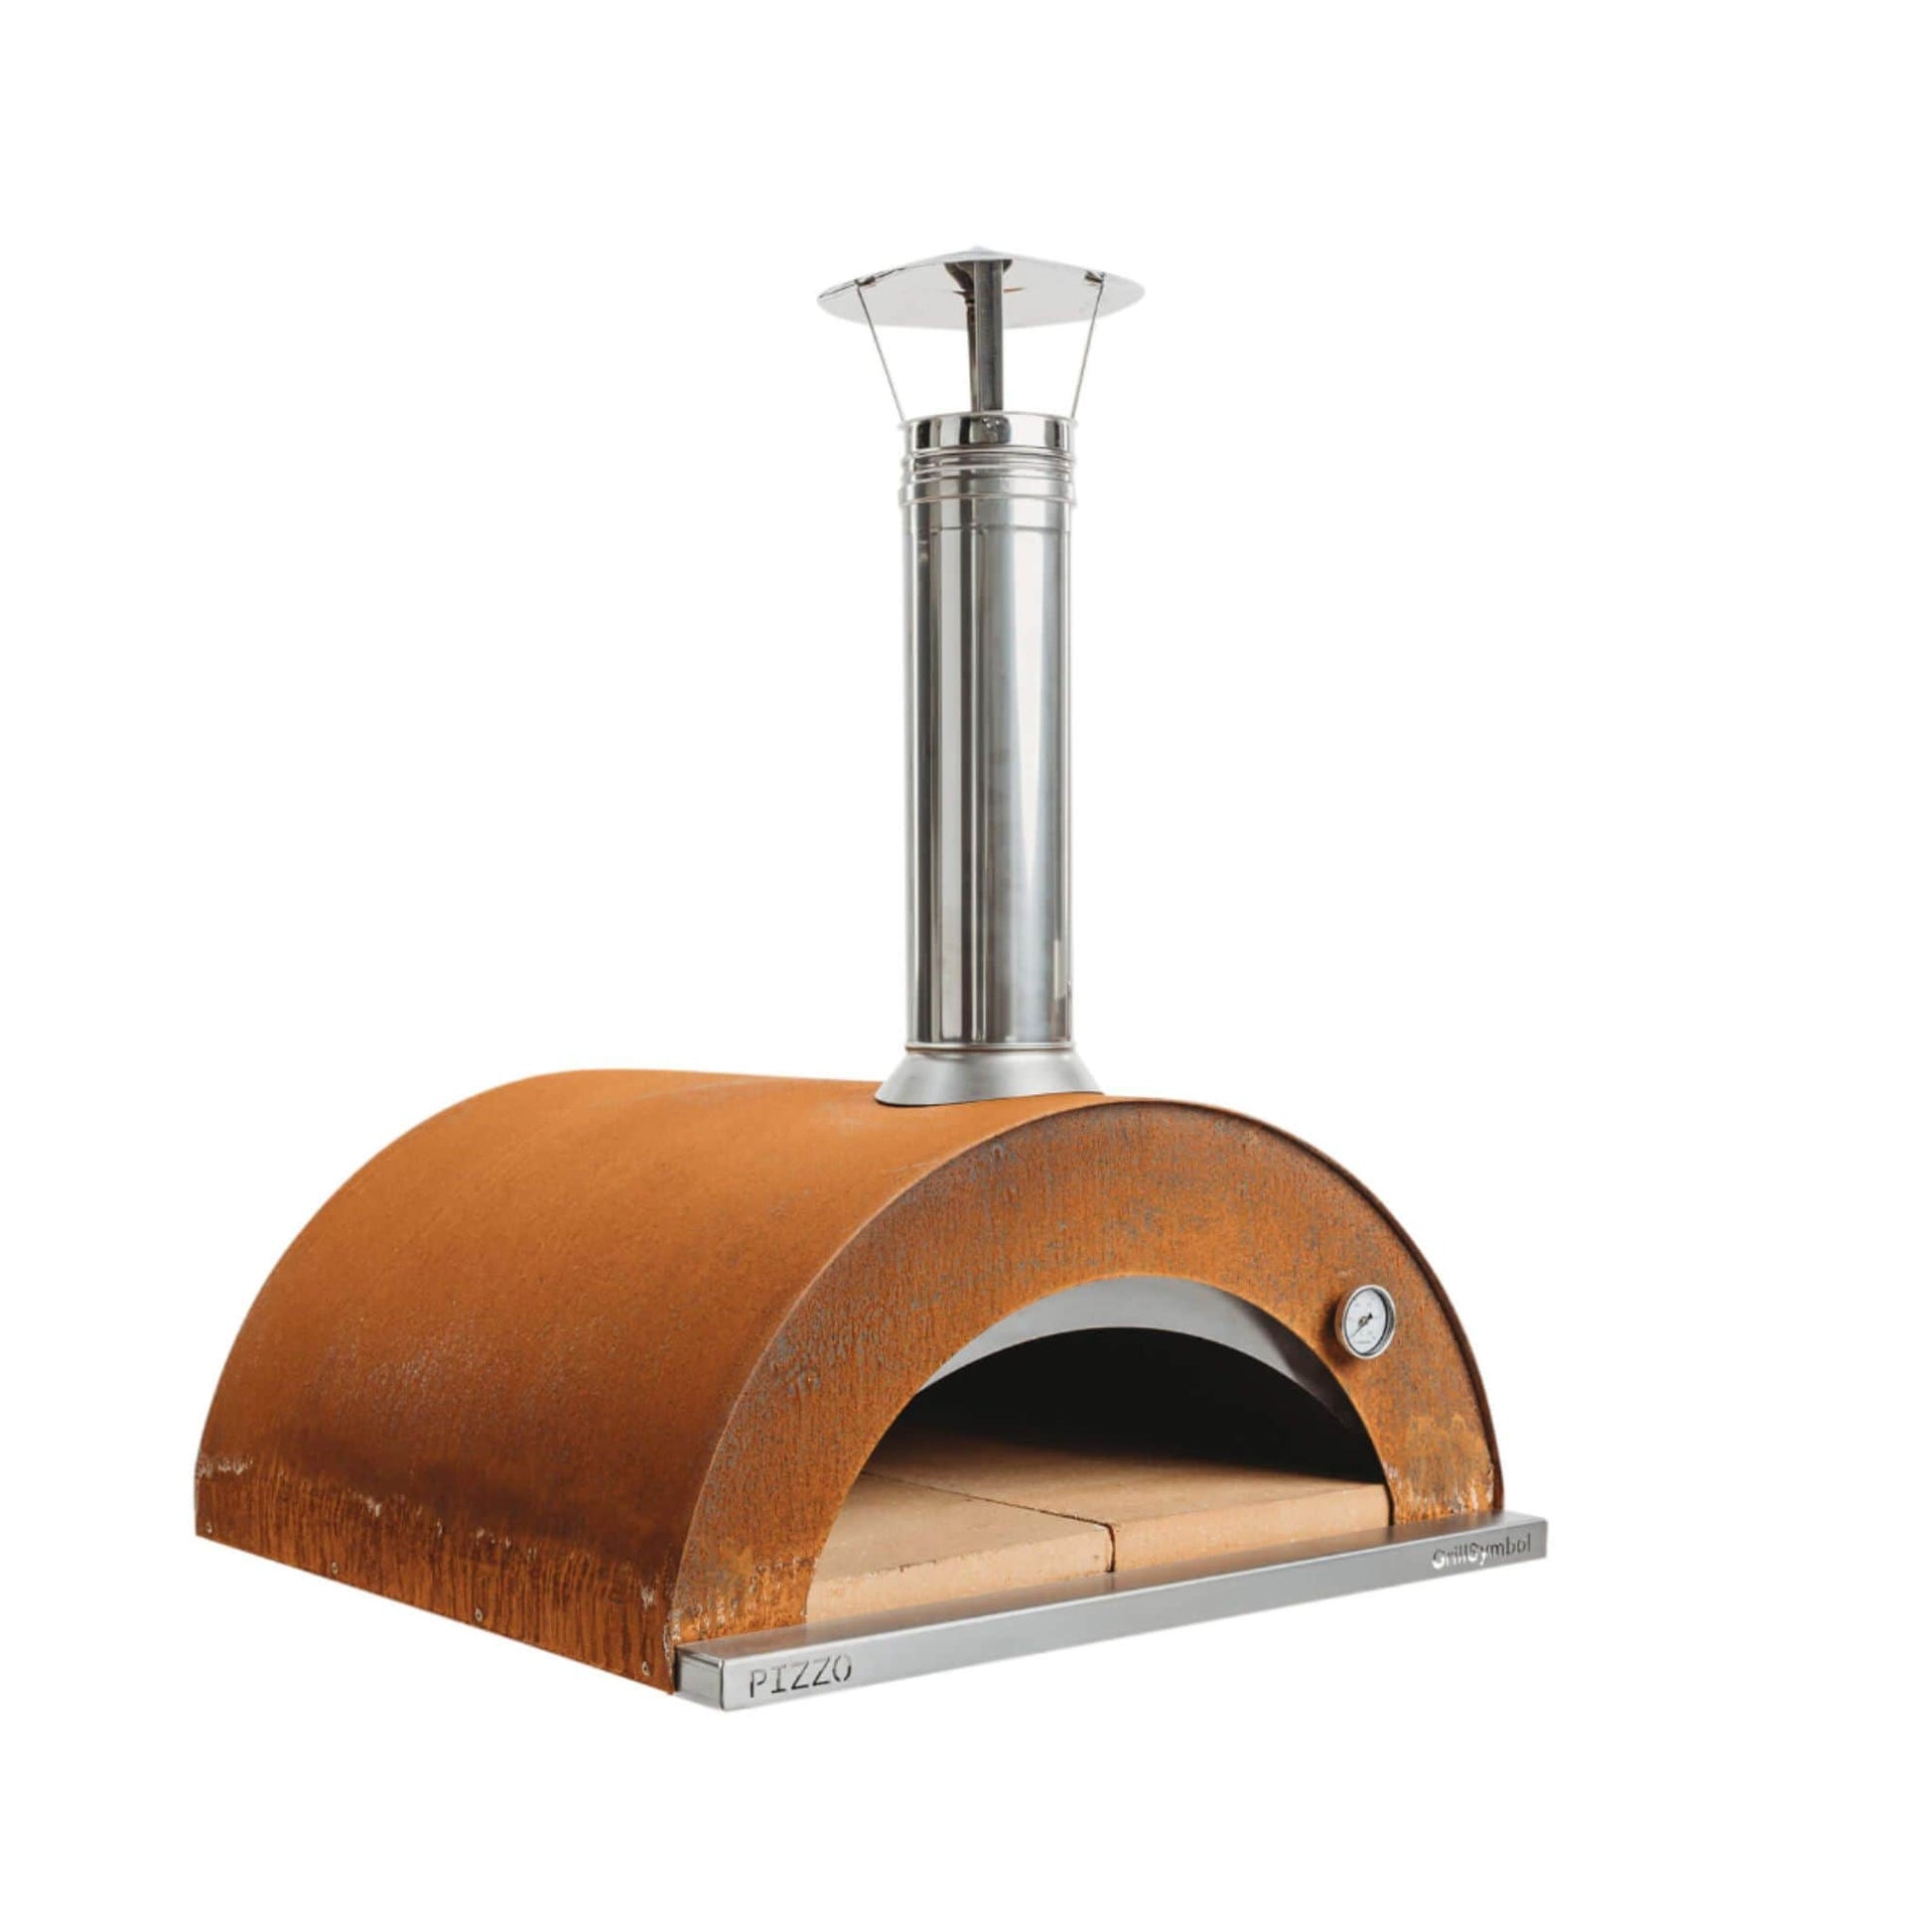 GrillSymbol Wood Fired Pizza Oven Pizzo